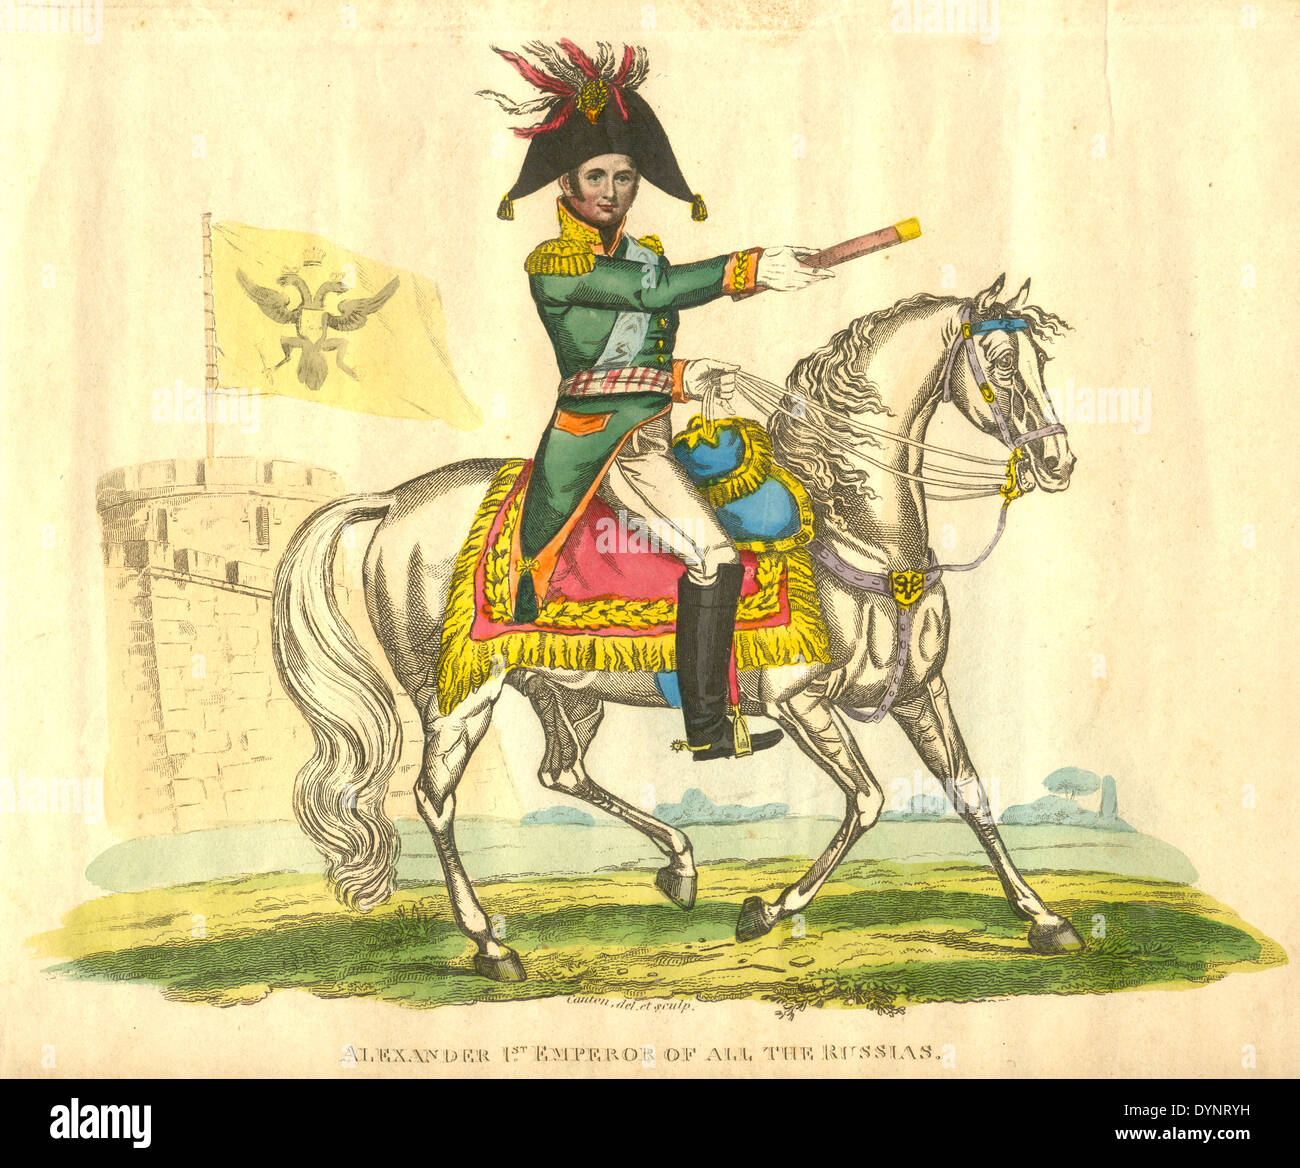 Hand coloured print of Alexander 1st Emperor of all the Russias Stock Photo